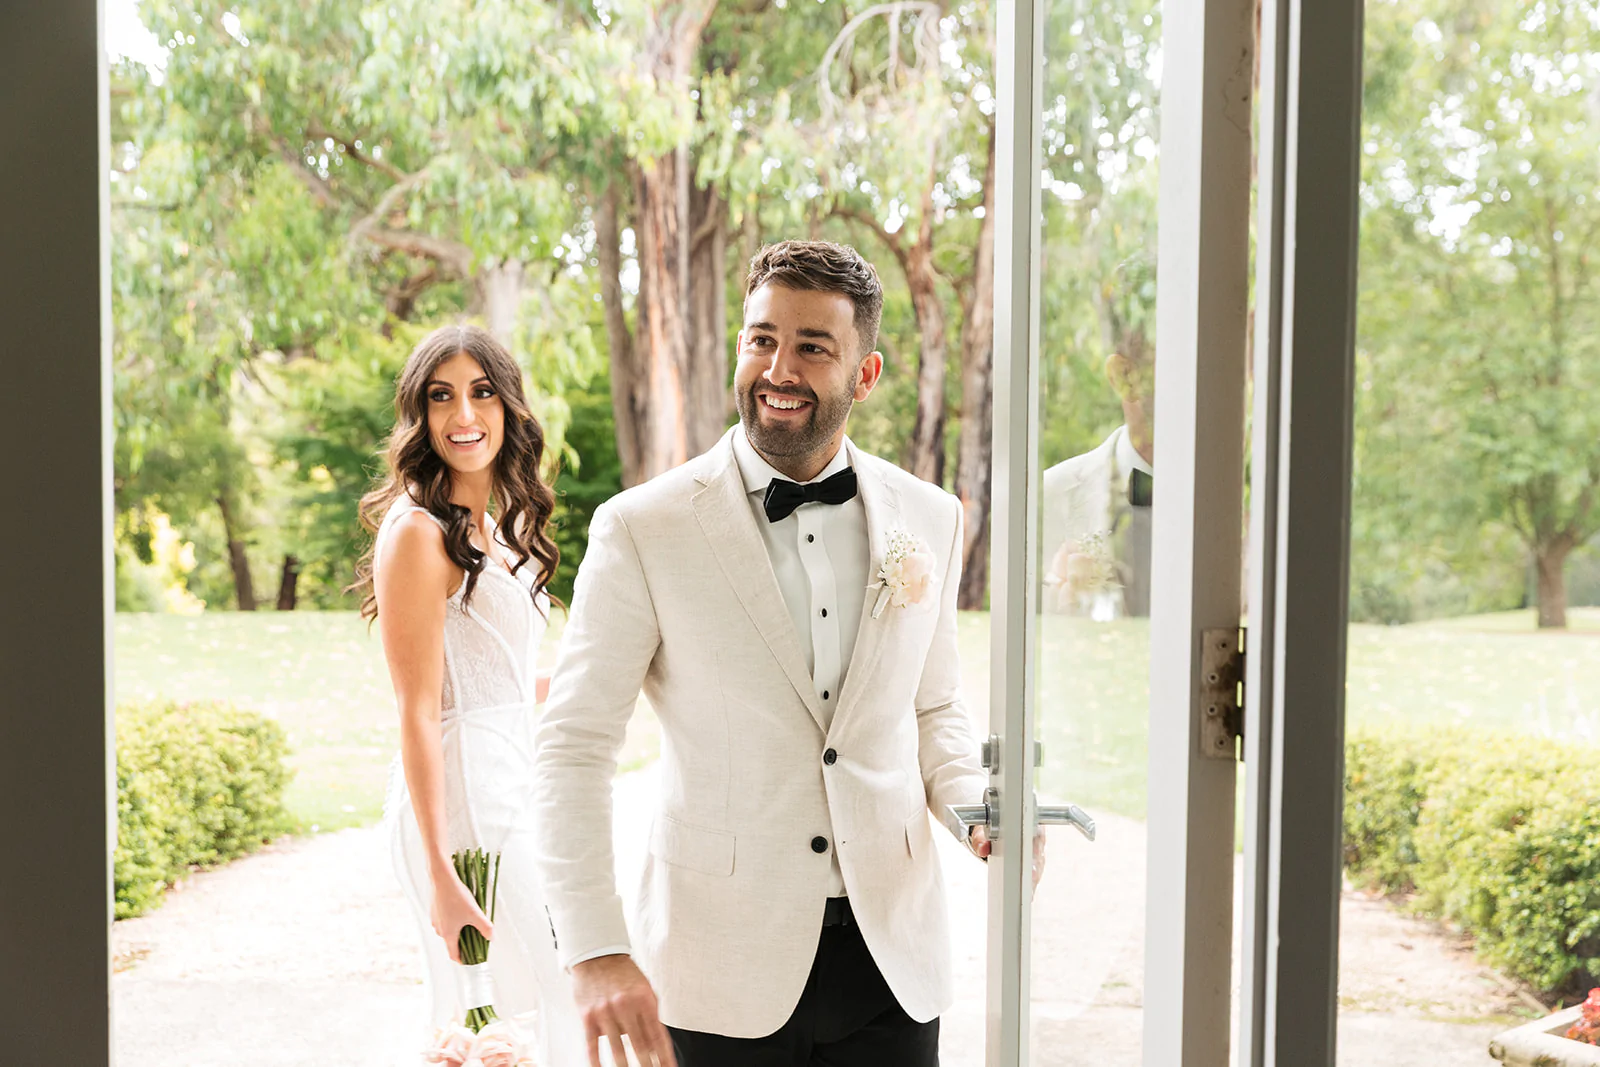 Sophisticated Wedding Suits